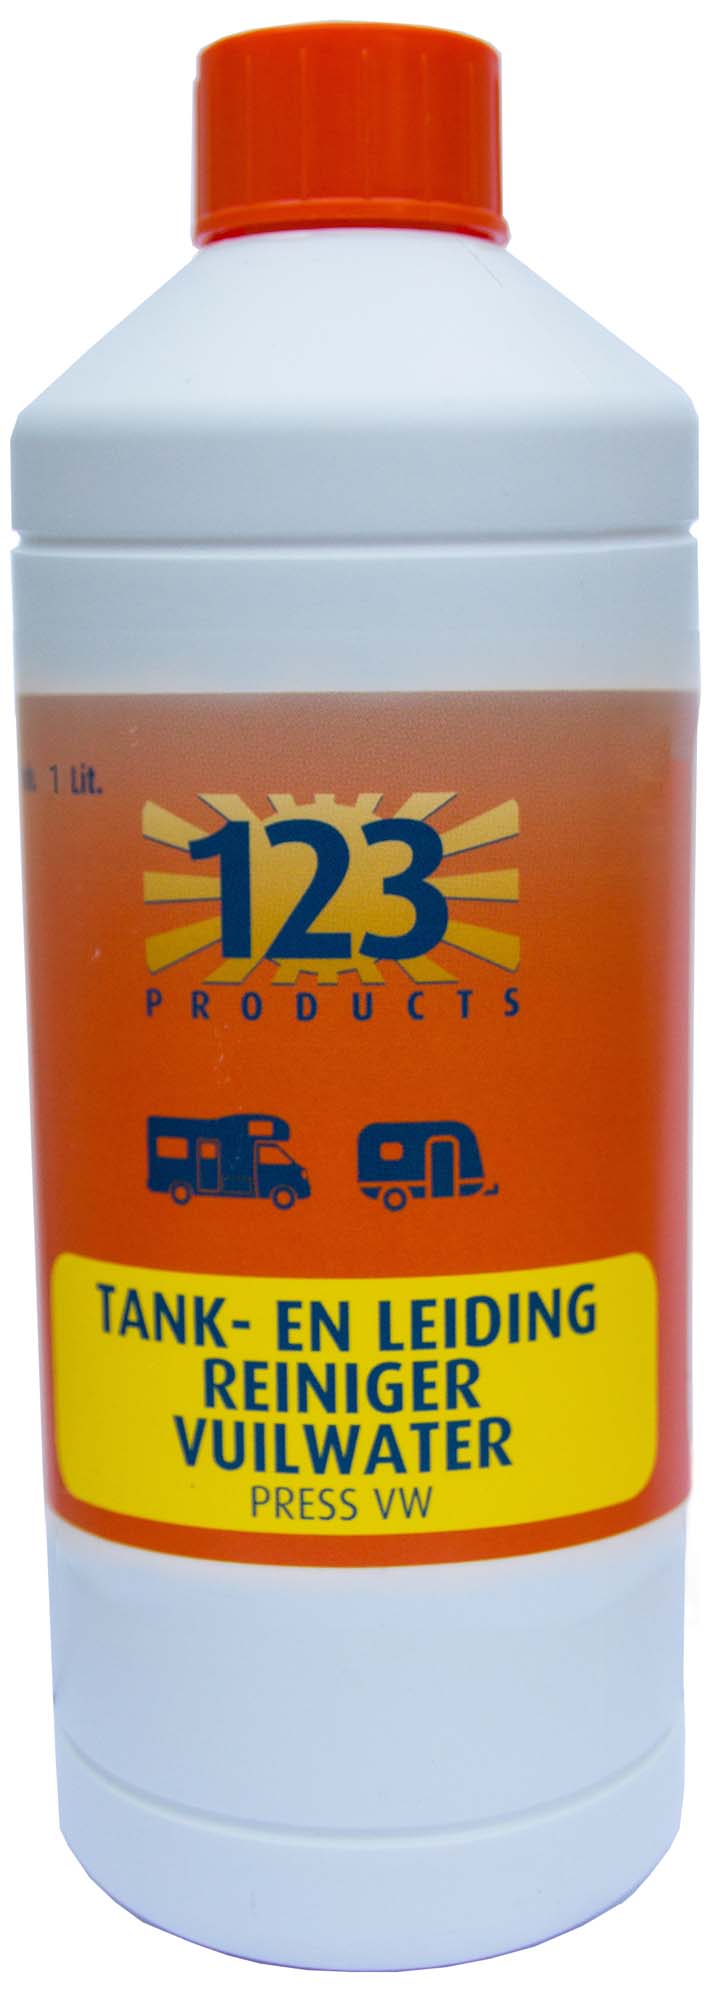 123 PRODUCTS Tank- leiding reiniger vuilwater